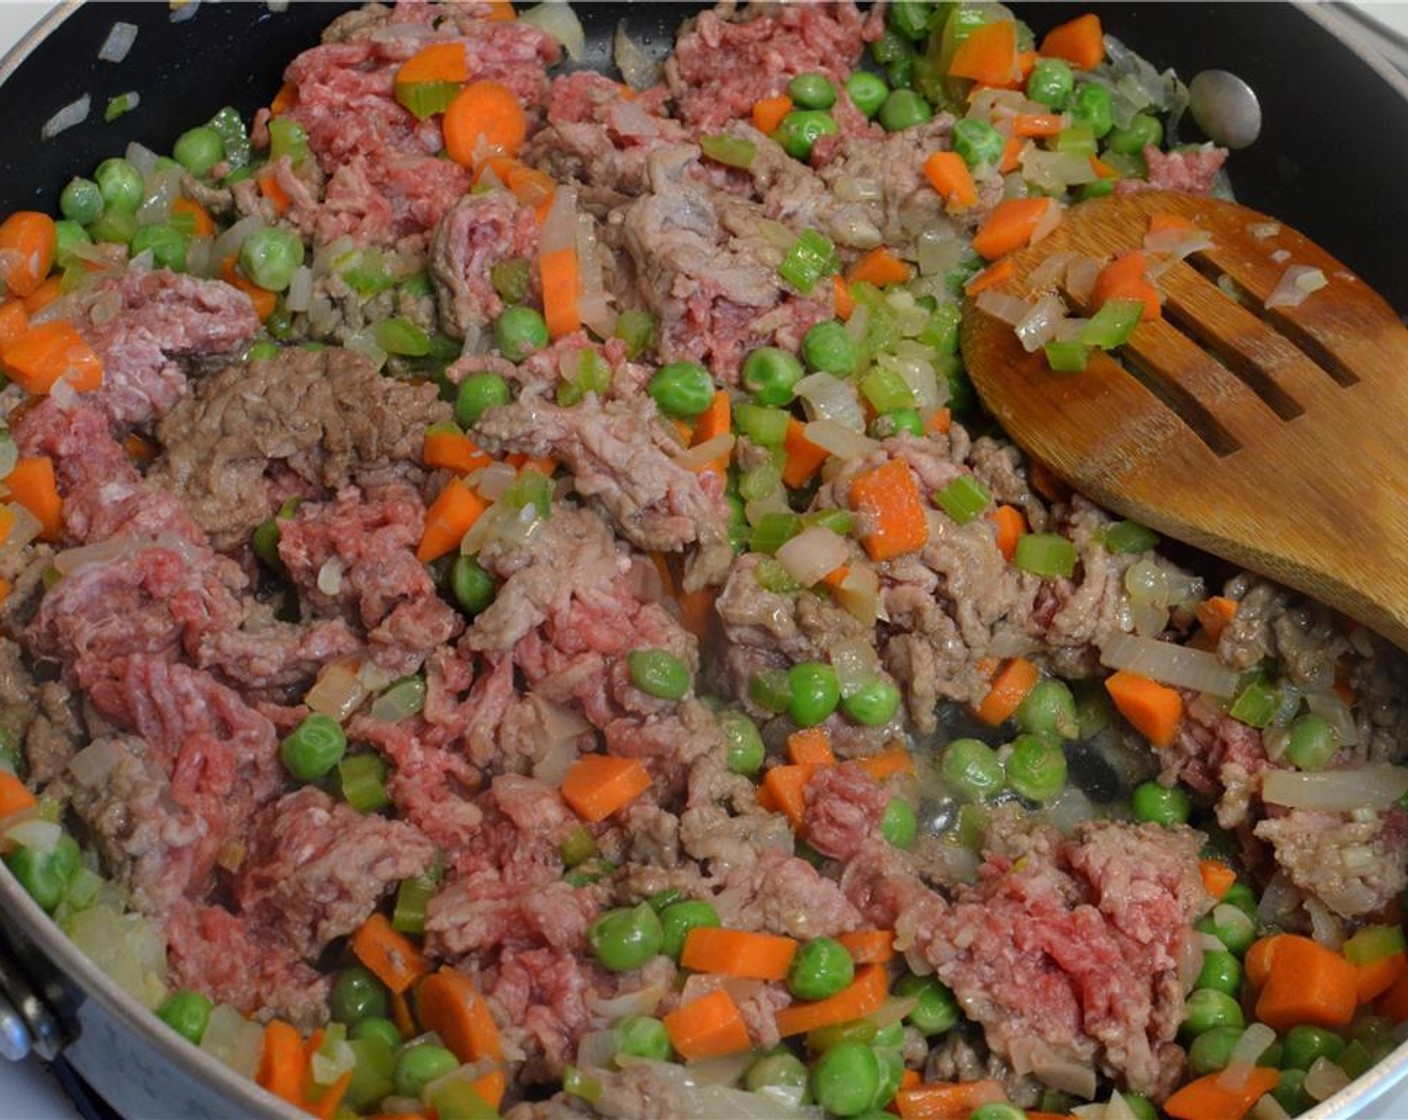 step 5 Add the Ground Beef (1 lb) and let it brown on medium-high heat along with all the veggies.